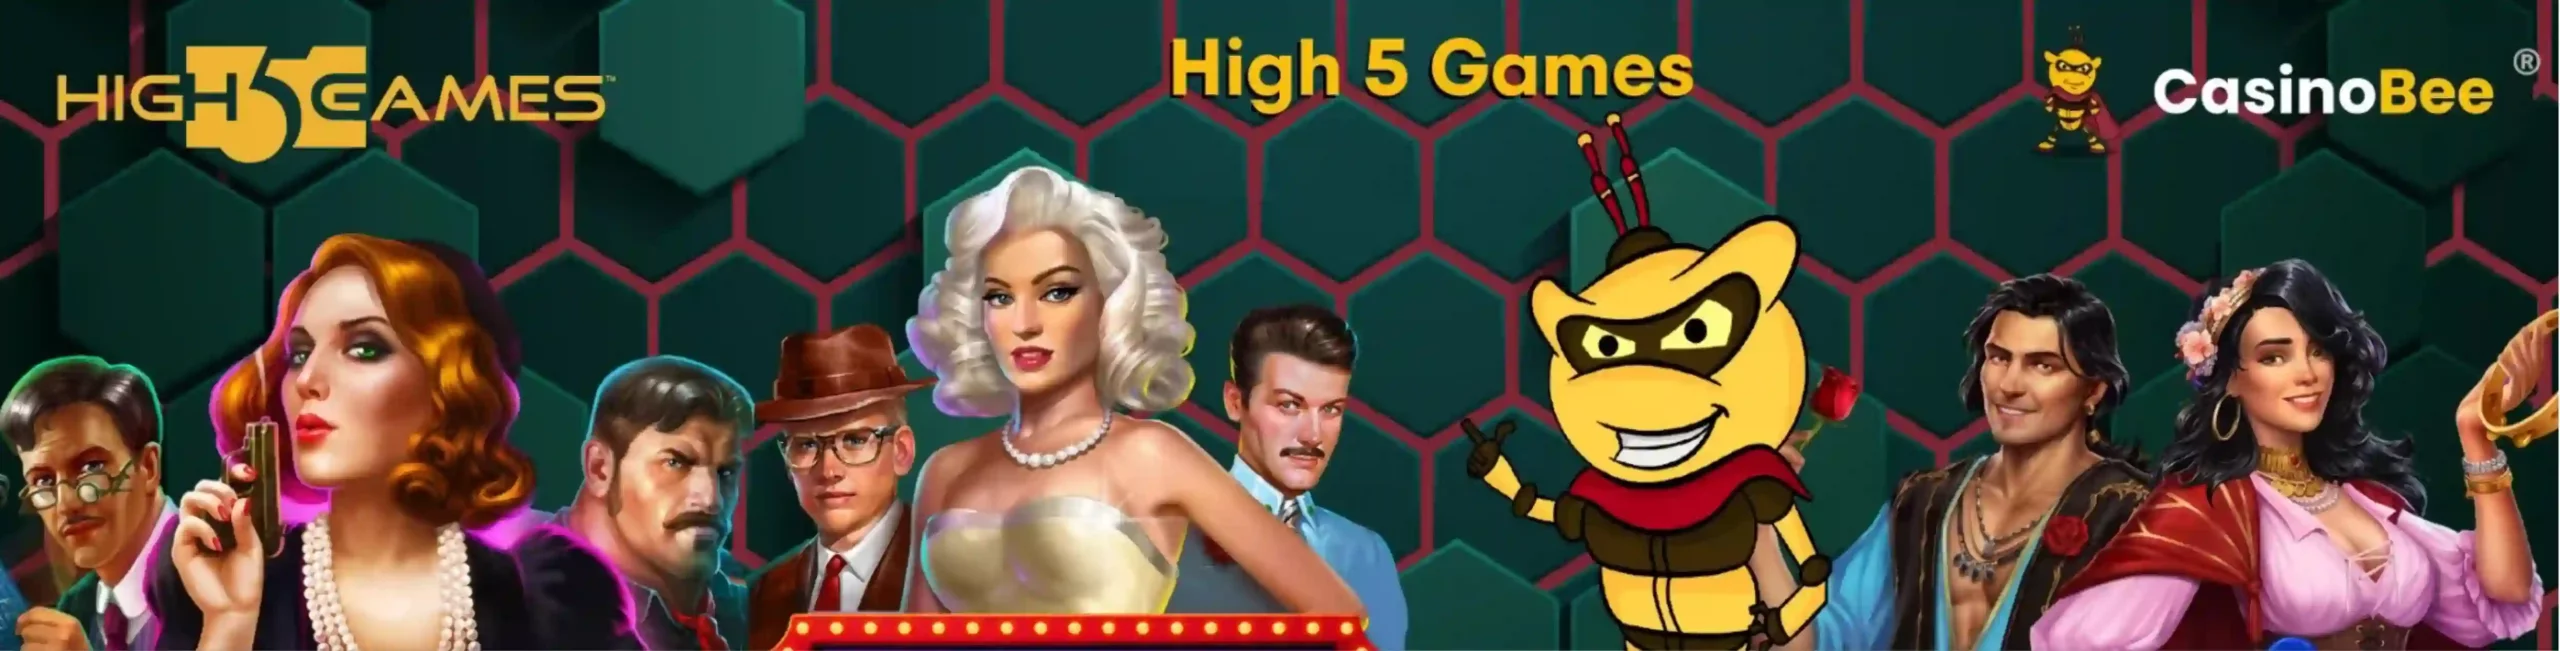 High 5 Games spilleautomater
